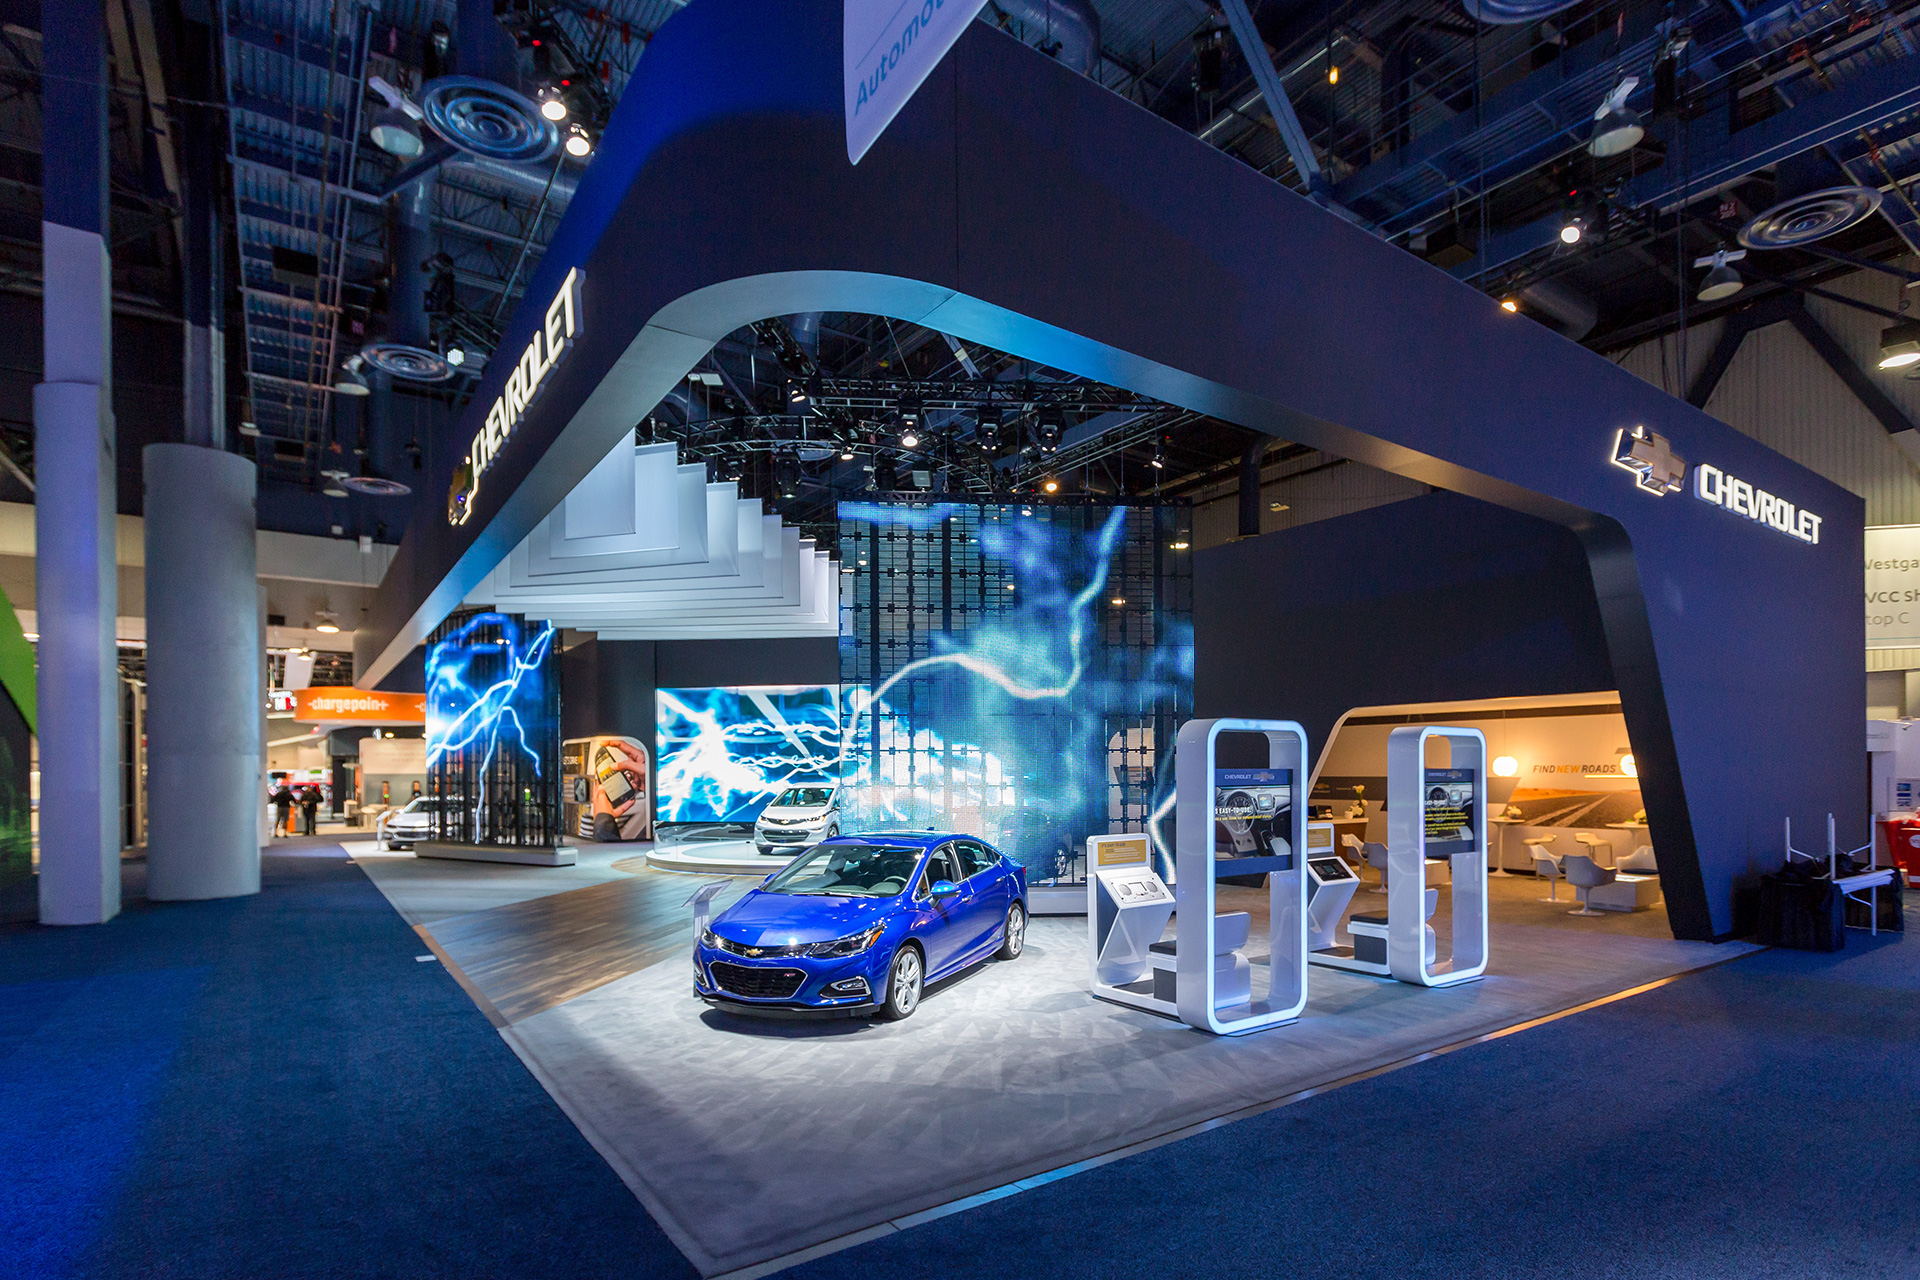 Chevrolet exhibit with a blue Chevy volt in the foreground, rounded rectangular interactive kiosks, video walls with lightning, and a grey volt on a pedestal in the background.